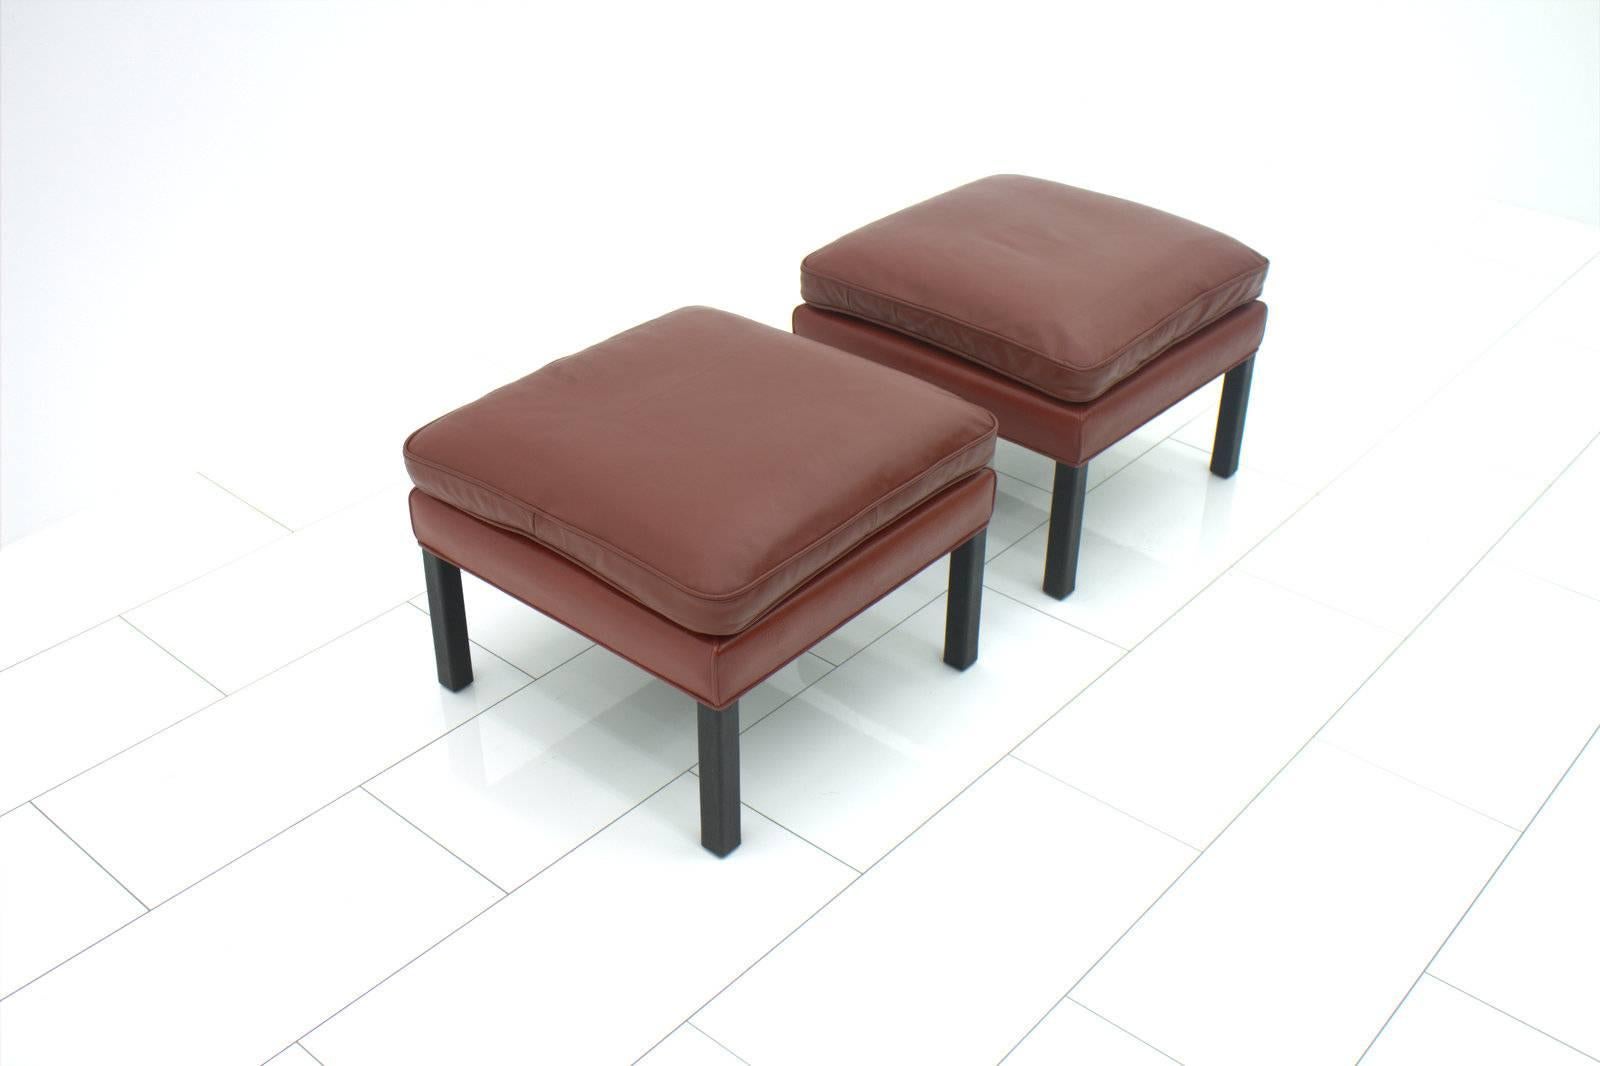 Set of two leather stools by Børge Mogensen, Denmark.
Very good condition.

Details:

Creator: Børge Mogensen (Designer),Fredericia (Maker)
Period: 1977
Color: red
Style: Scandinavian Modern
Place of Origin: Denmark
Dimensions: Height: 17.33 in. (44